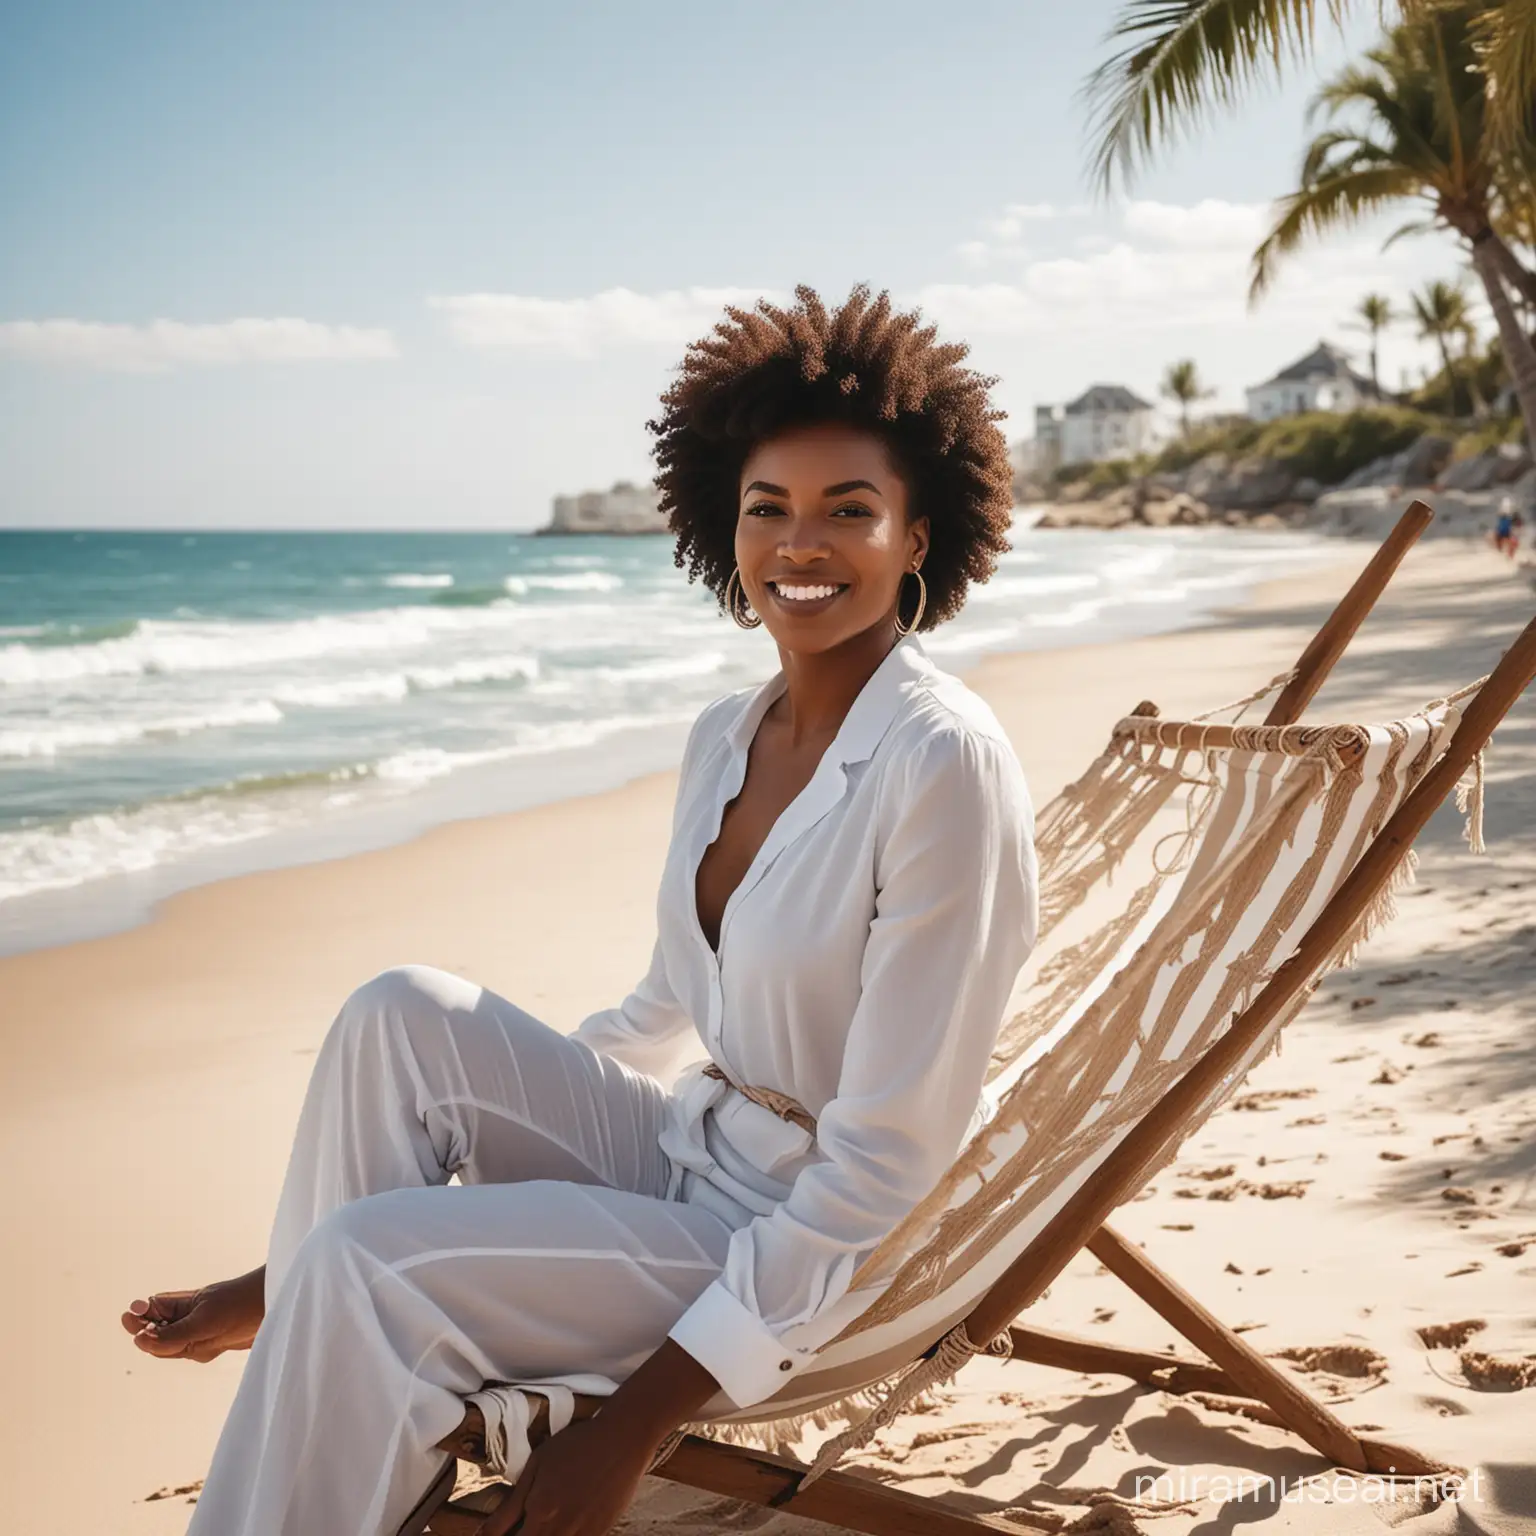 Corporate Woman Finding Serenity Relaxation by the Beach